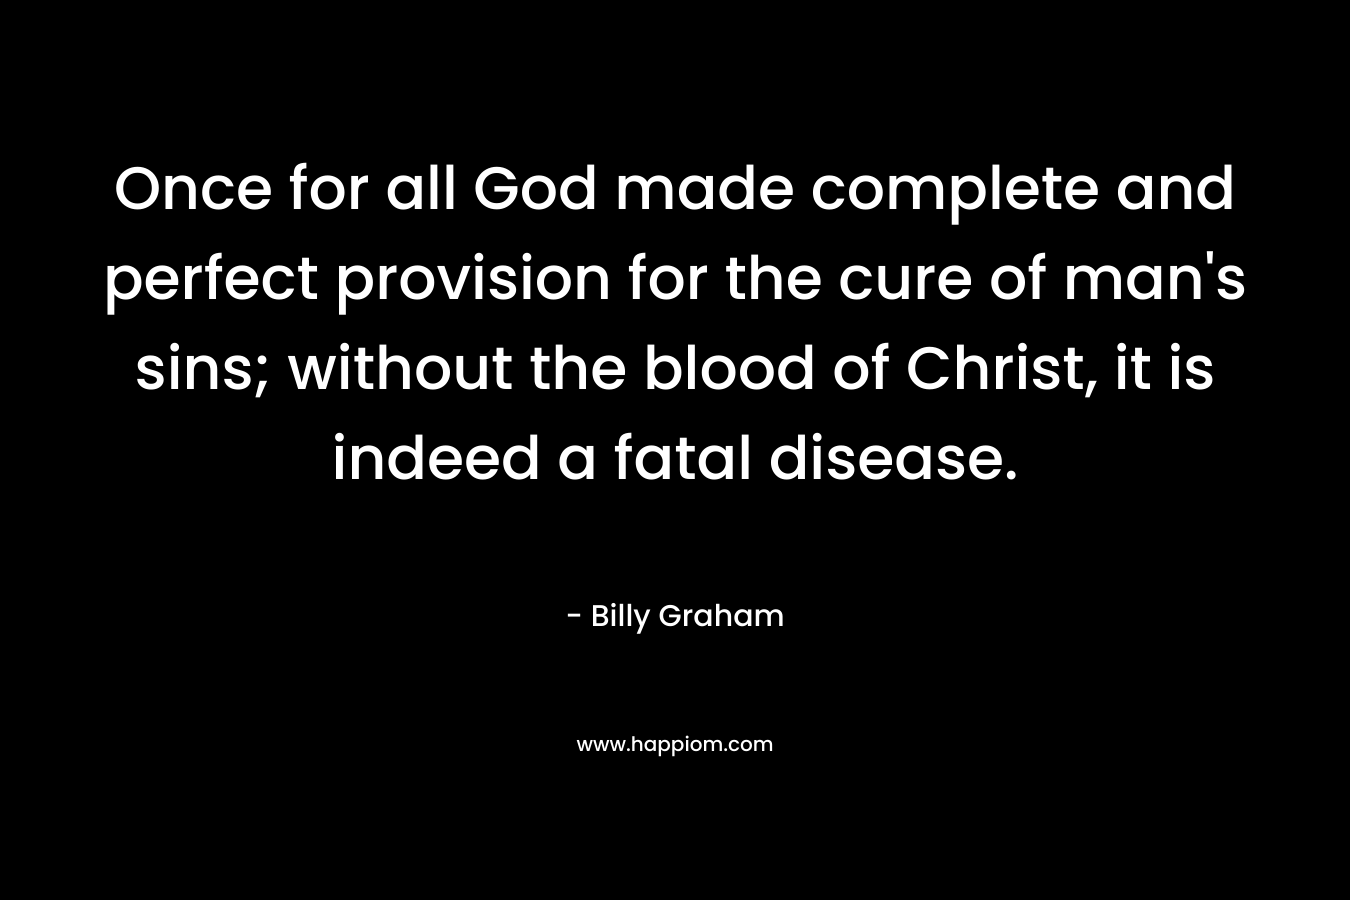 Once for all God made complete and perfect provision for the cure of man's sins; without the blood of Christ, it is indeed a fatal disease.